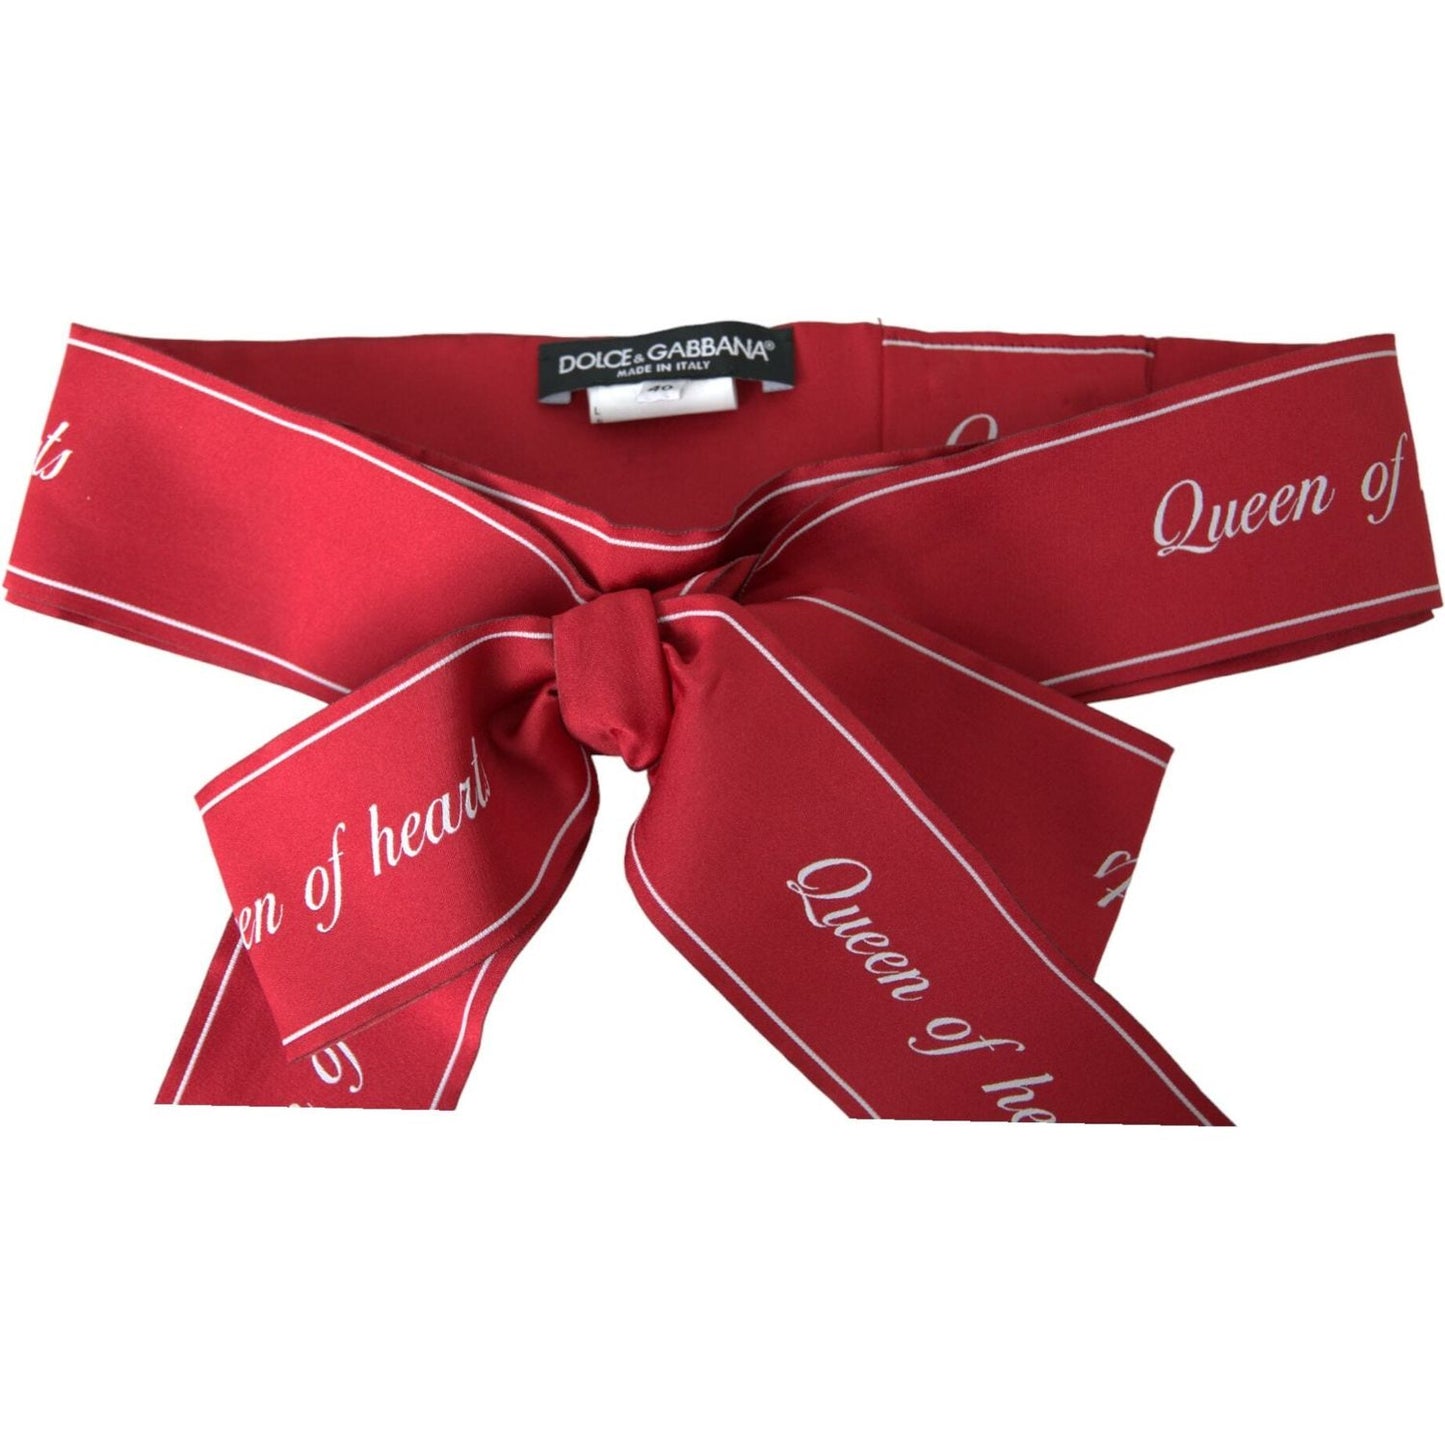 Dolce & Gabbana Red Polyester QUEEN OF HEARTS Belt red-polyester-queen-of-hearts-belt